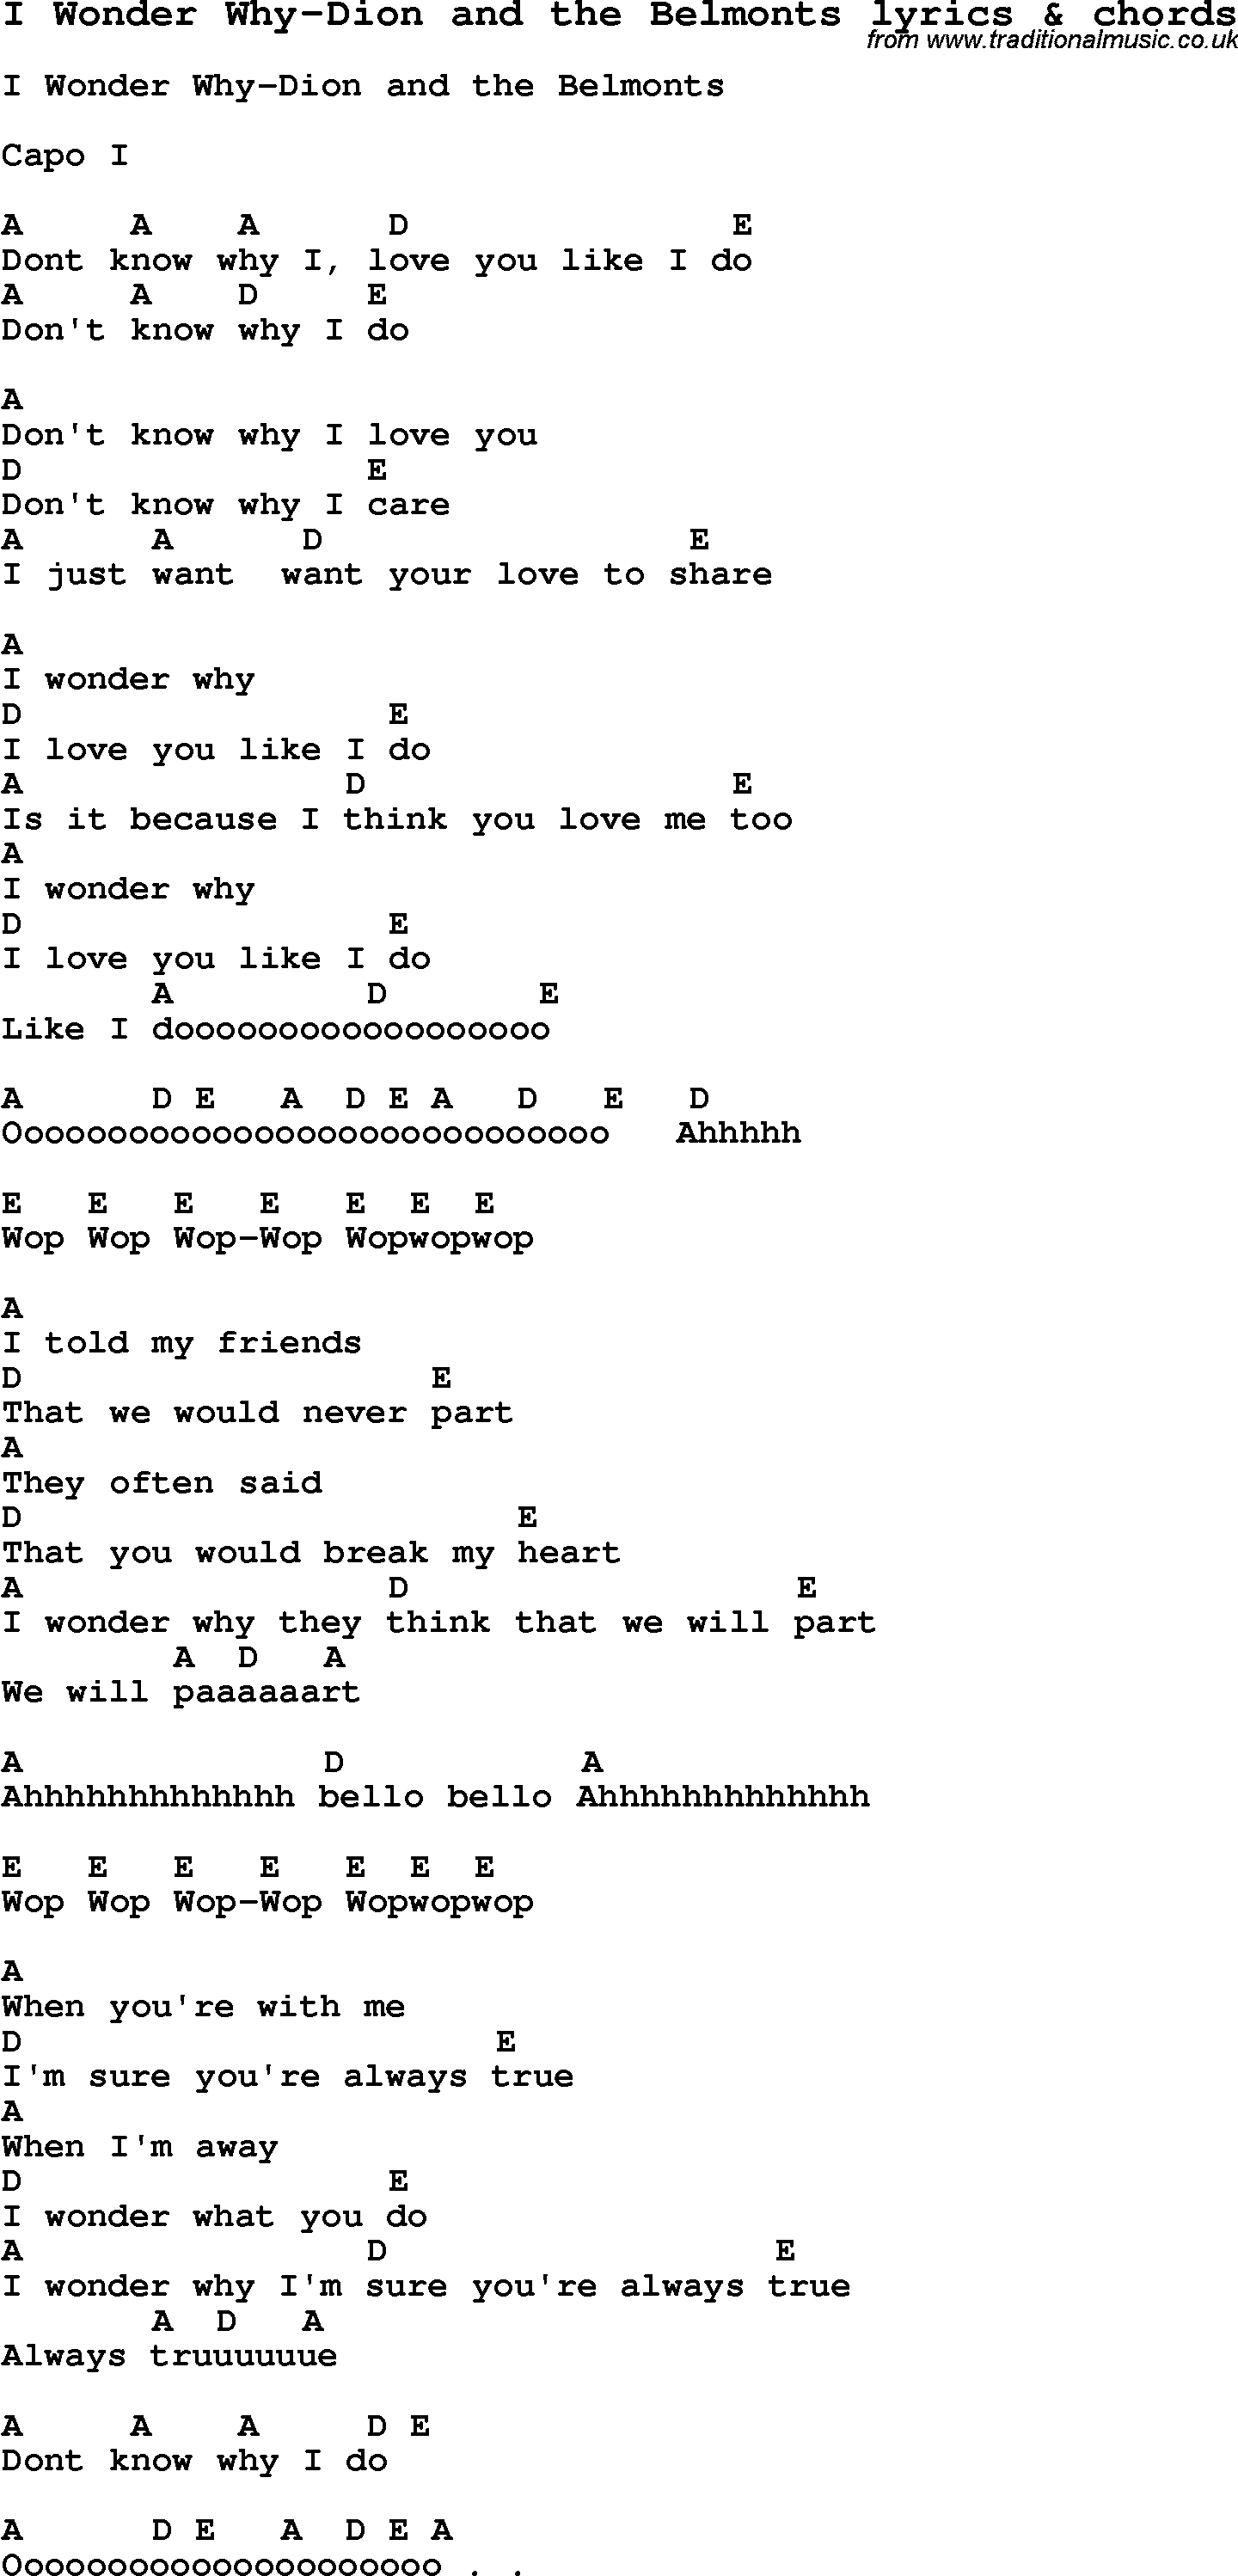 Love Song Lyrics for: I Wonder Why-Dion and the Belmonts with chords for Ukulele, Guitar Banjo etc.